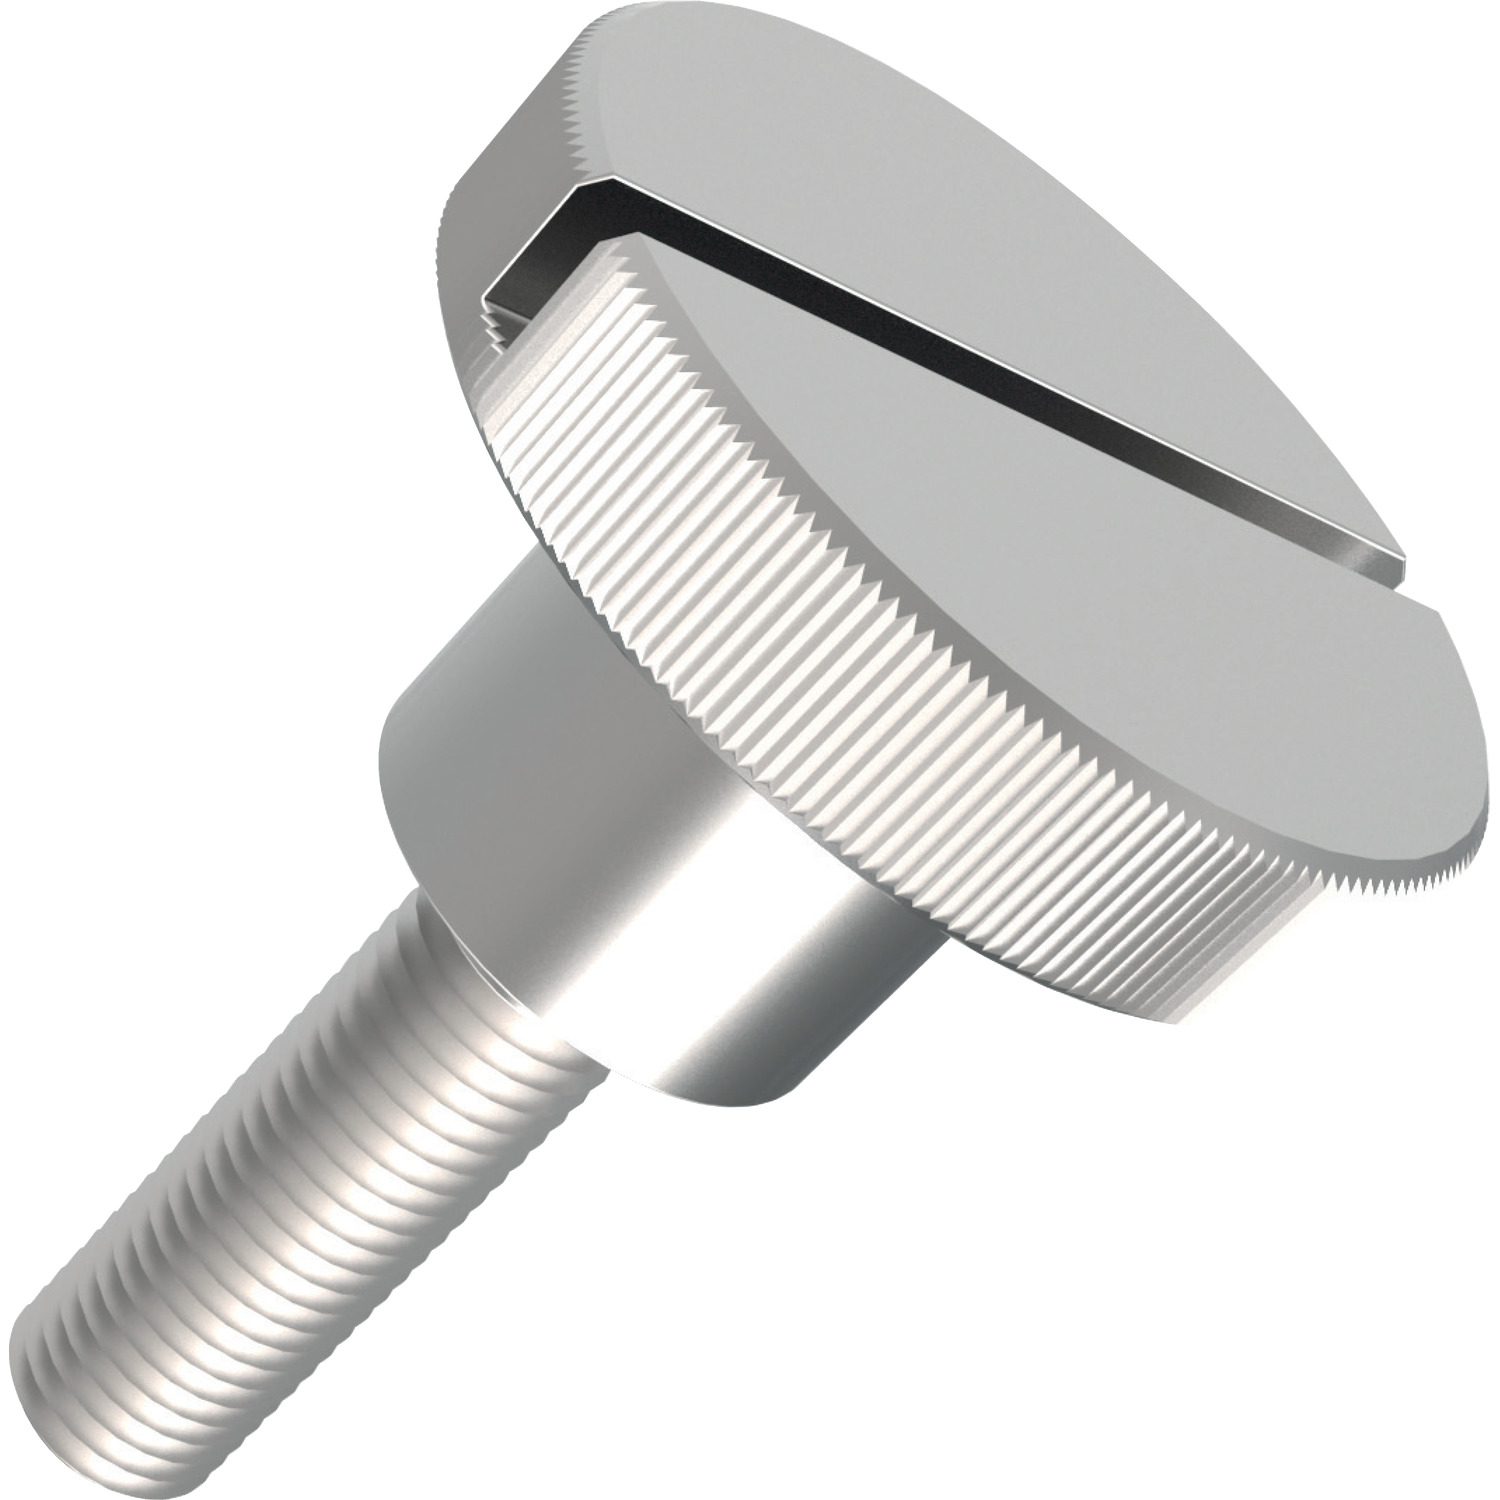 Product P0404, Knurled Thumb Screws with slot  / 